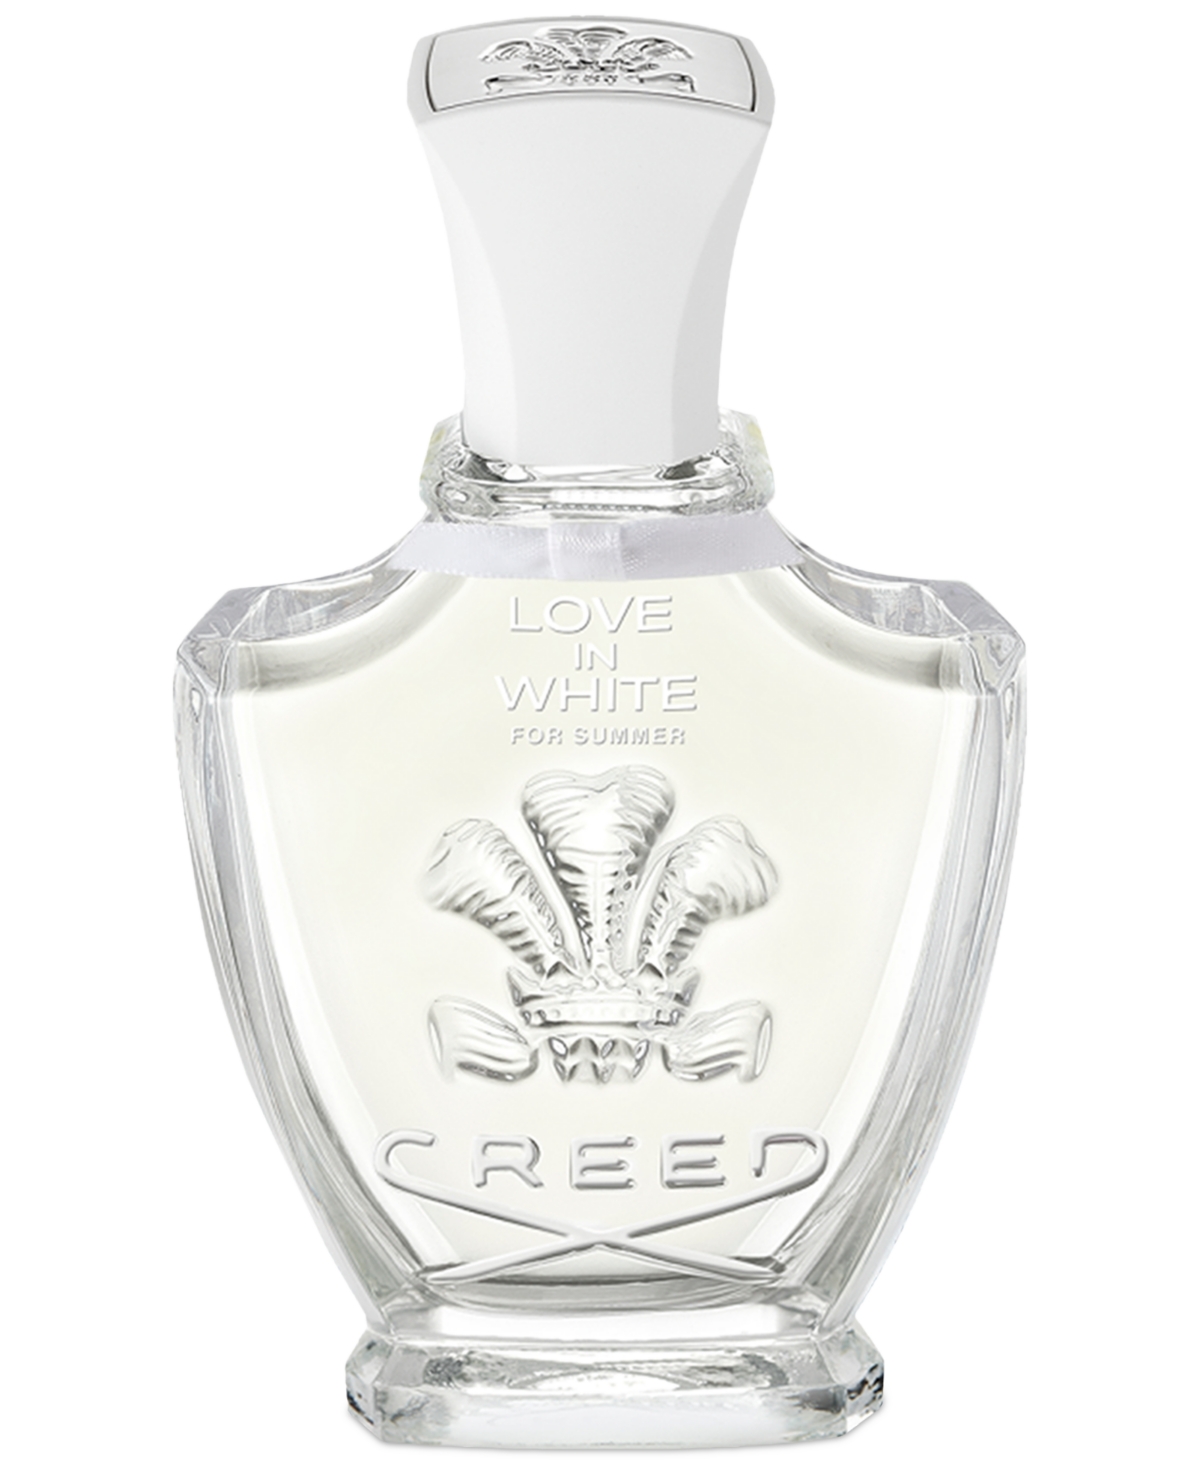 Creed Love In White For Summer, 2.5 Oz.